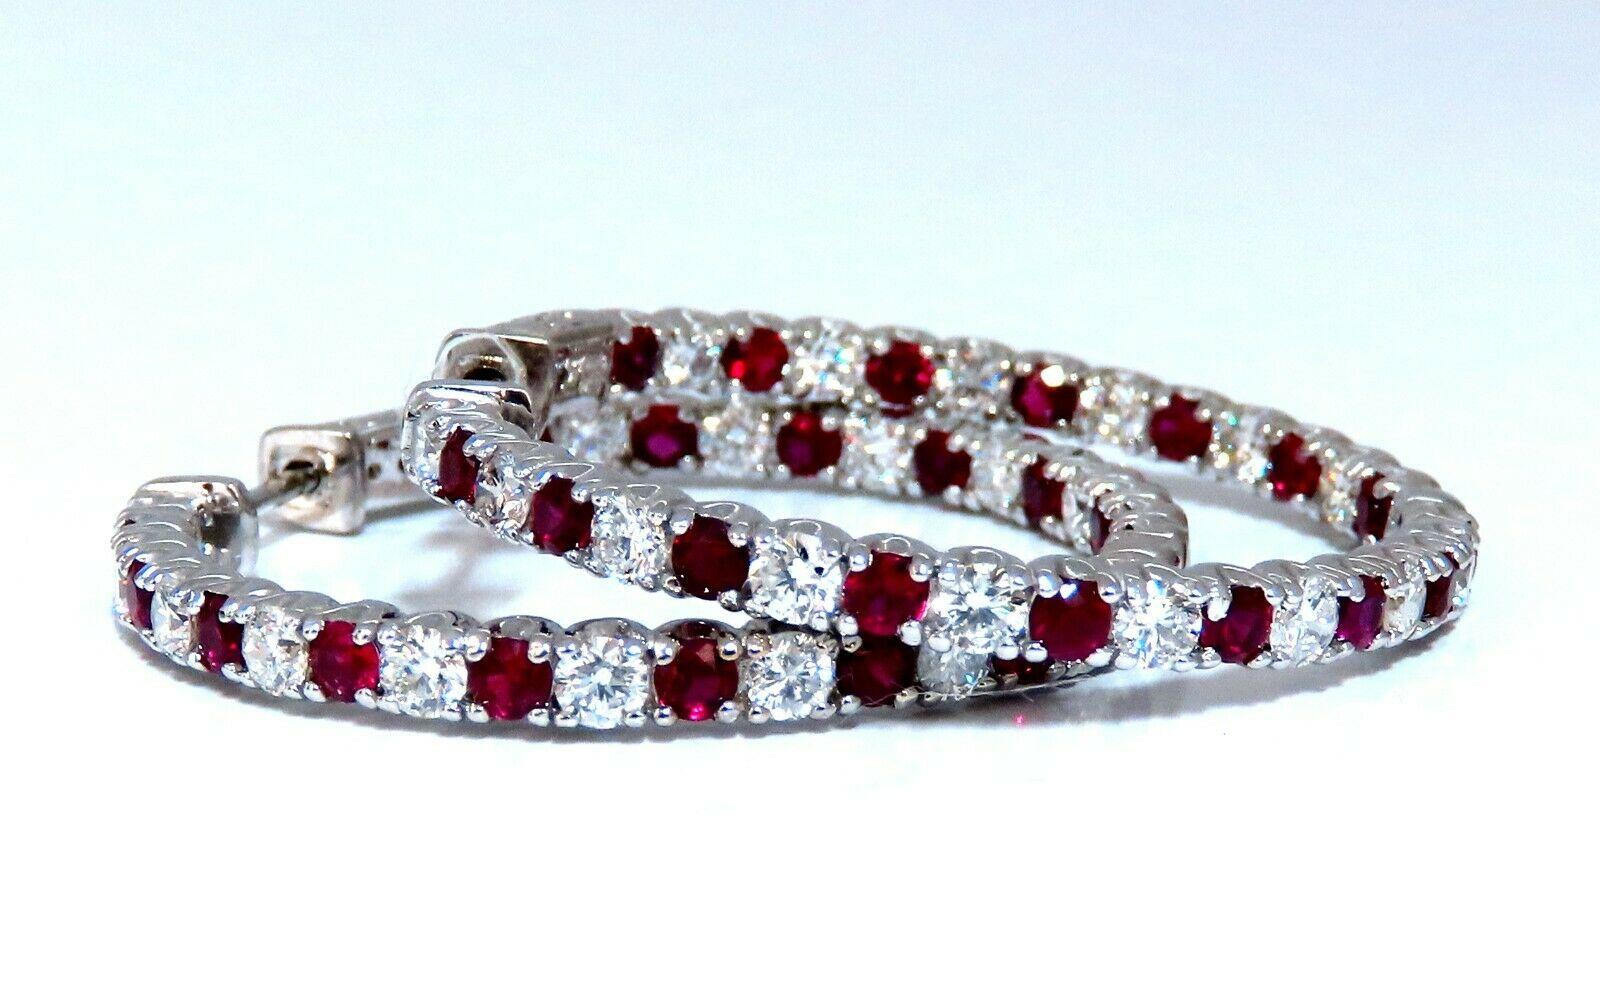 In / Out Hoop Earrings

Rubies, Diamonds Alternated 

2.50ct. Natural Rubies.

Rubies: Rounds, Full Cut.

Transparent & Even Red tone.

Vivid red colors



2.25cts of round diamonds: 

G-color, Vs-2 clarity.

14kt. white gold

12.1 grams.

Earrings